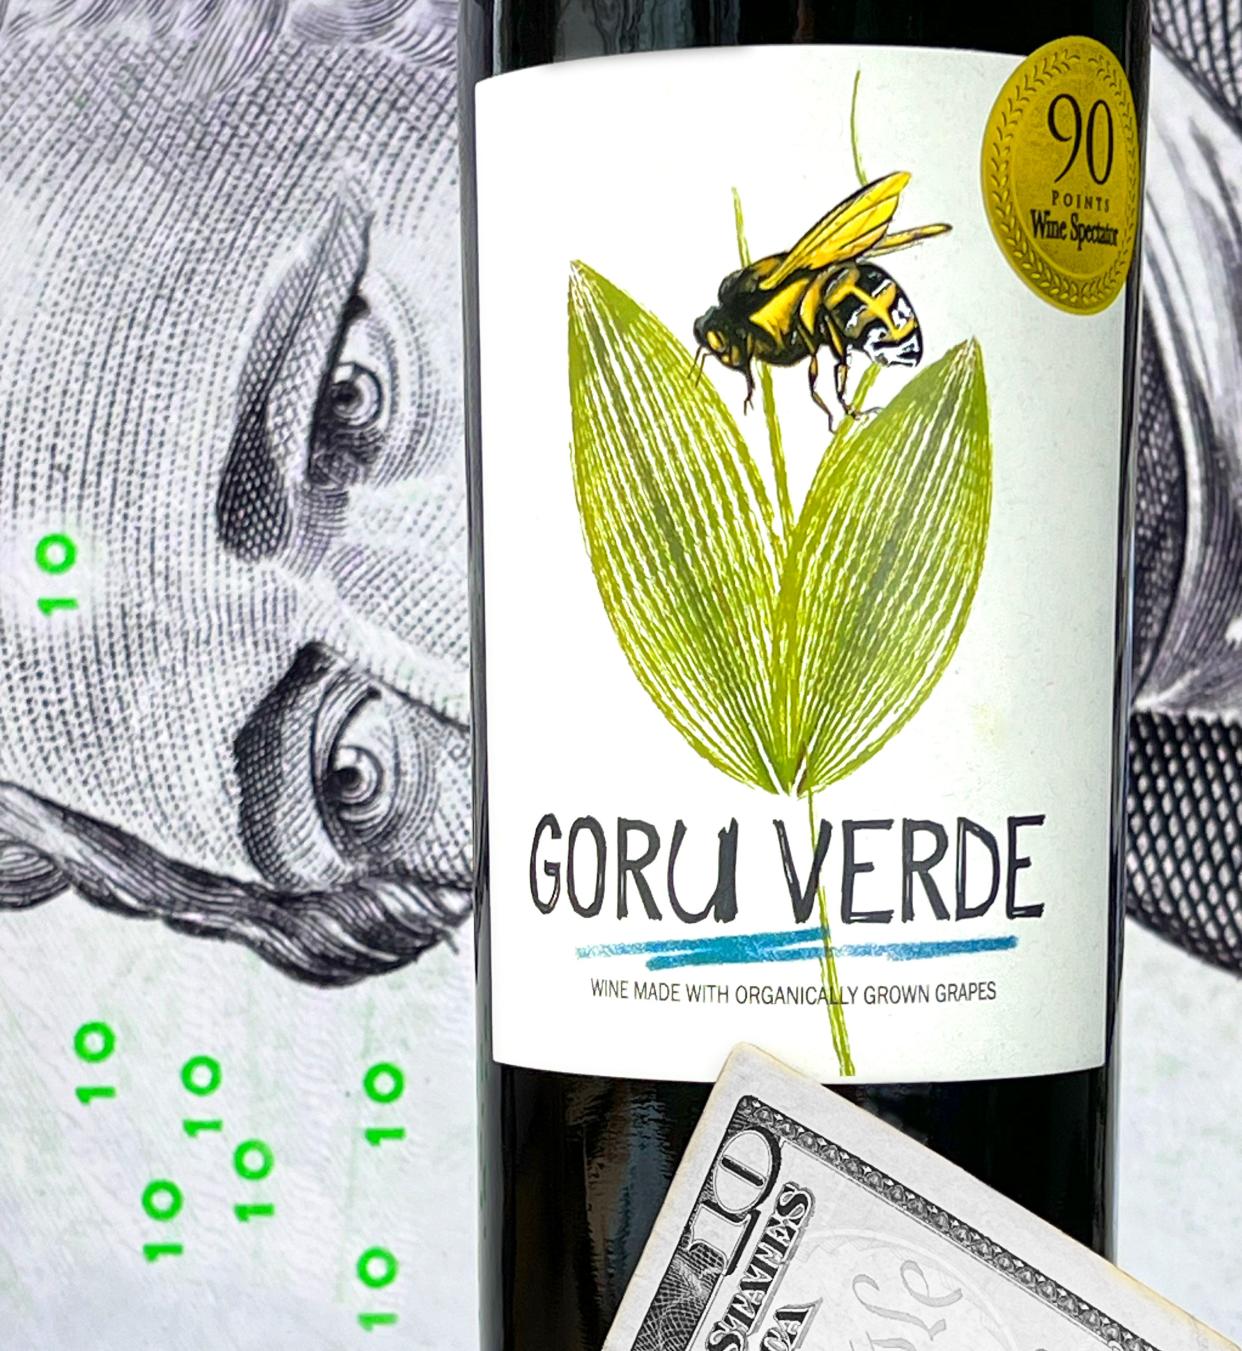 At $9.99, Goru Verde is an incredible red wine value from Spain.